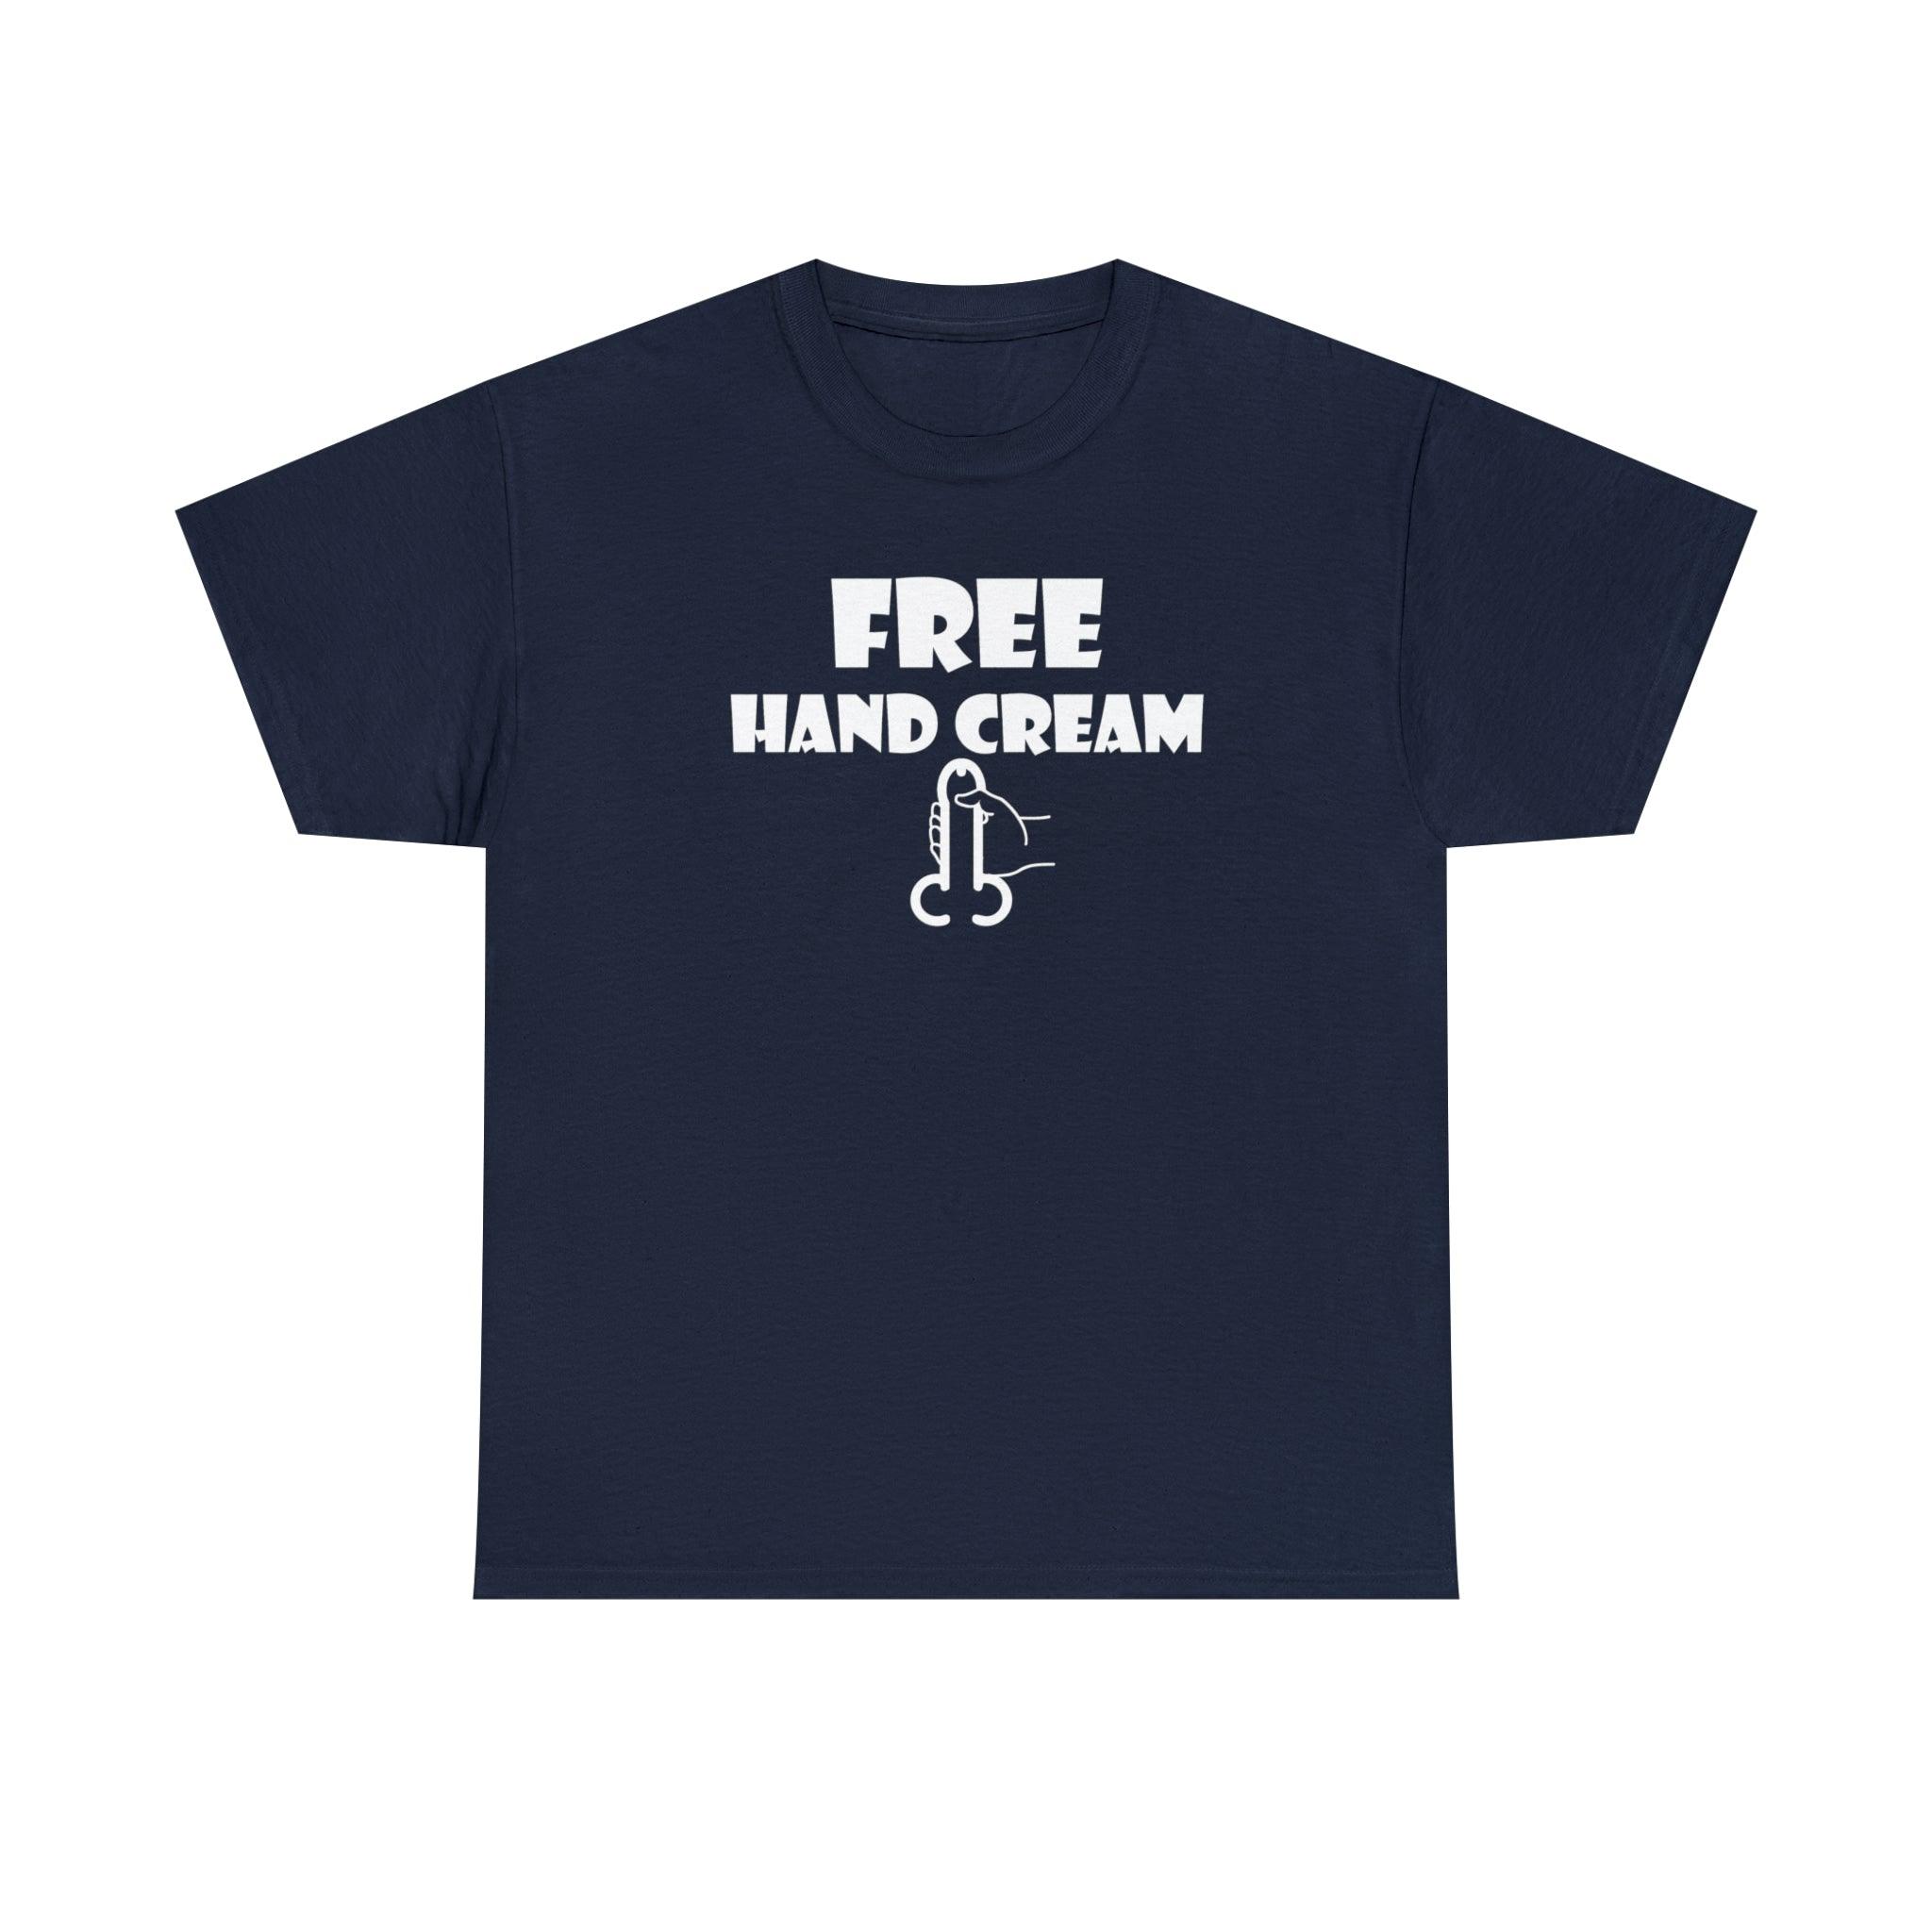 Free Hand Cream funny mens humor t-shirt about masturbation picture picture